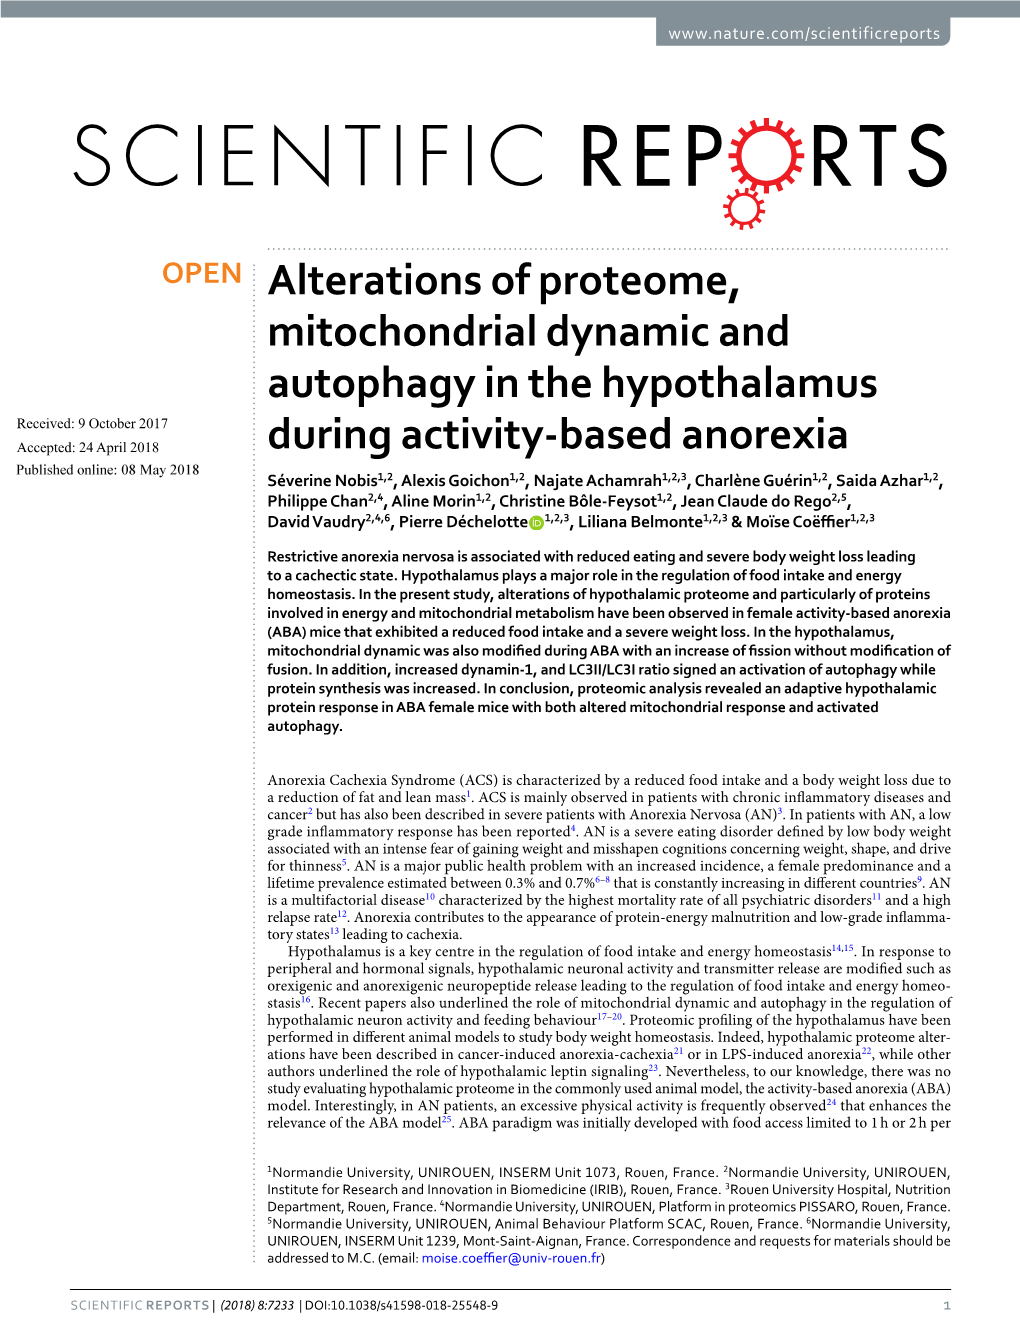 Alterations of Proteome, Mitochondrial Dynamic and Autophagy in The